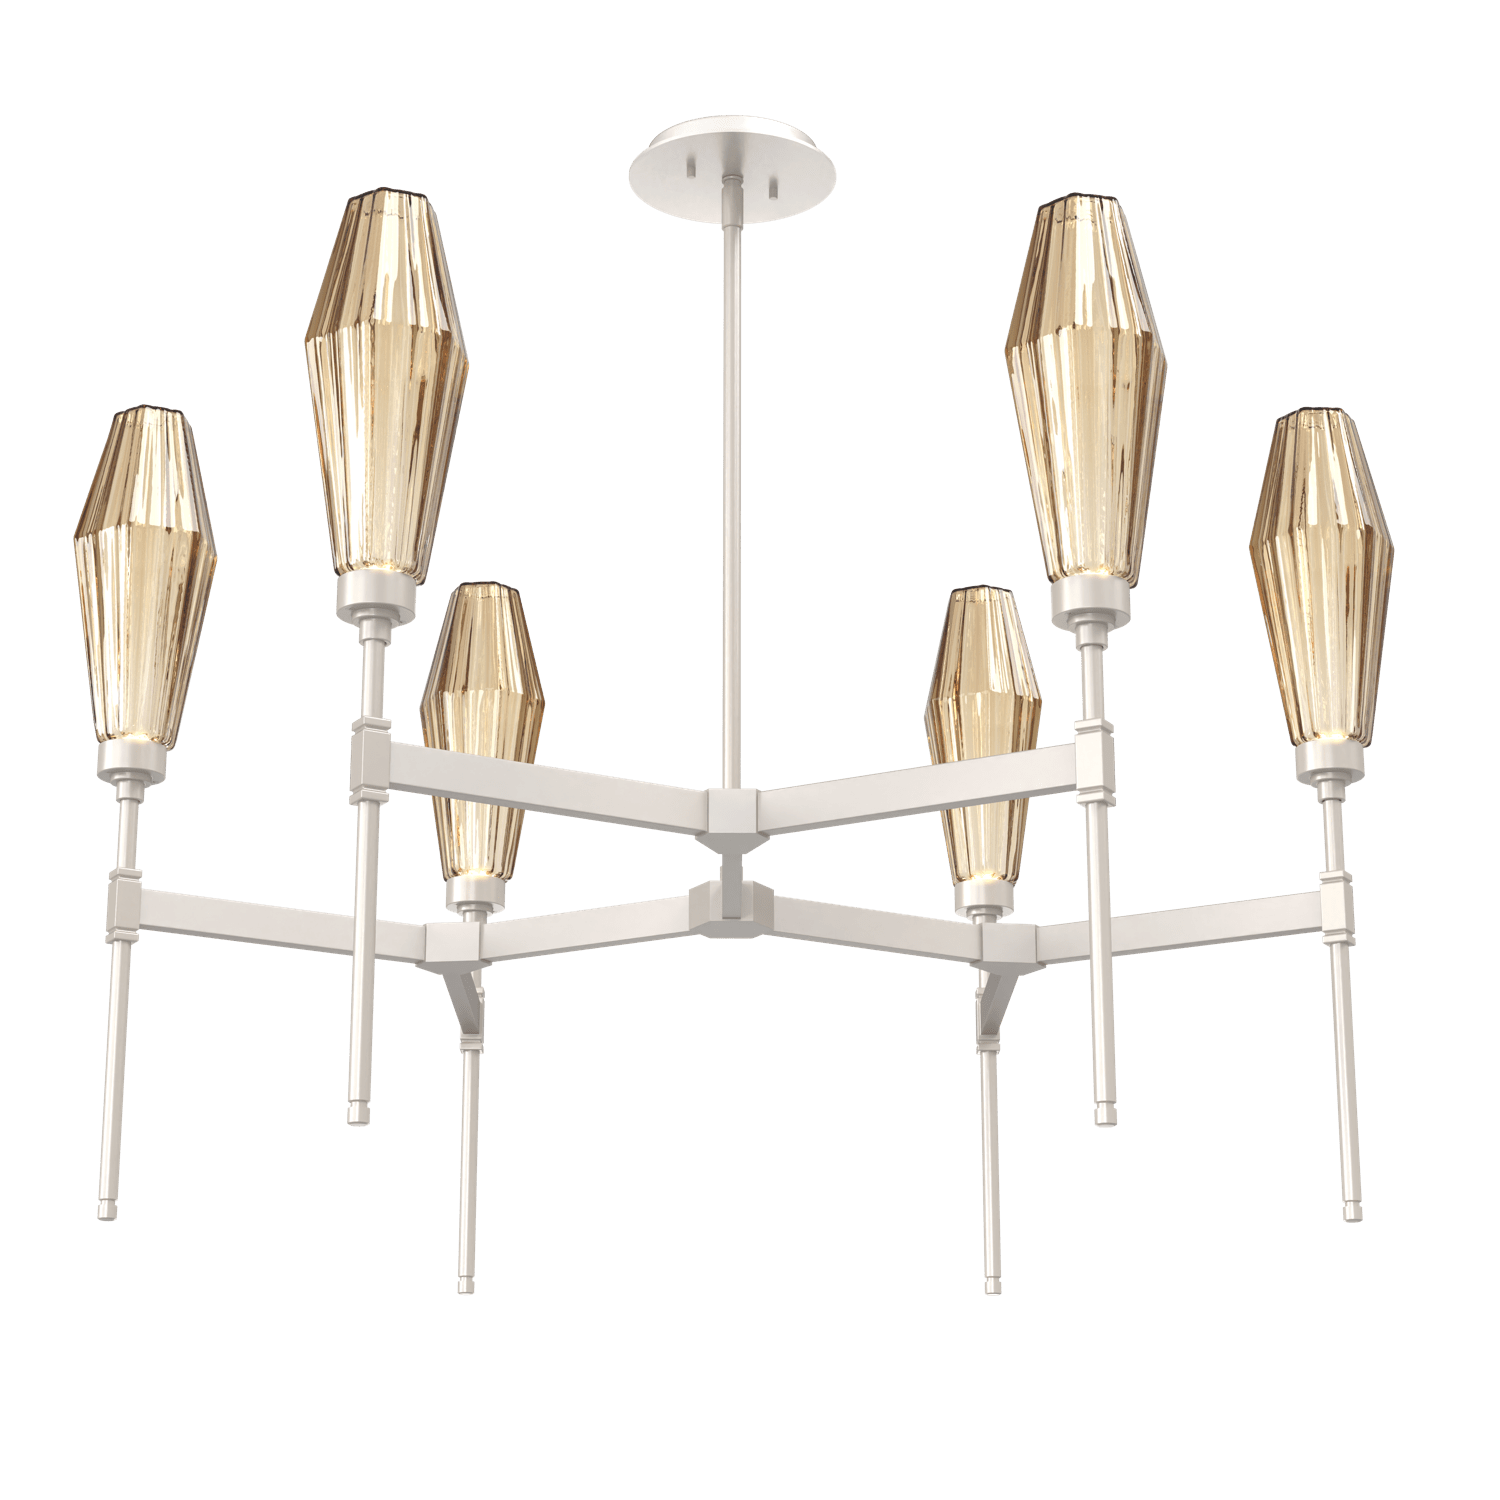 CHB0049-37-BS-RB-Hammerton-Studio-Aalto-37-inch-round-belvedere-chandelier-with-metallic-beige-silver-finish-and-optic-ribbed-bronze-glass-shades-and-LED-lamping